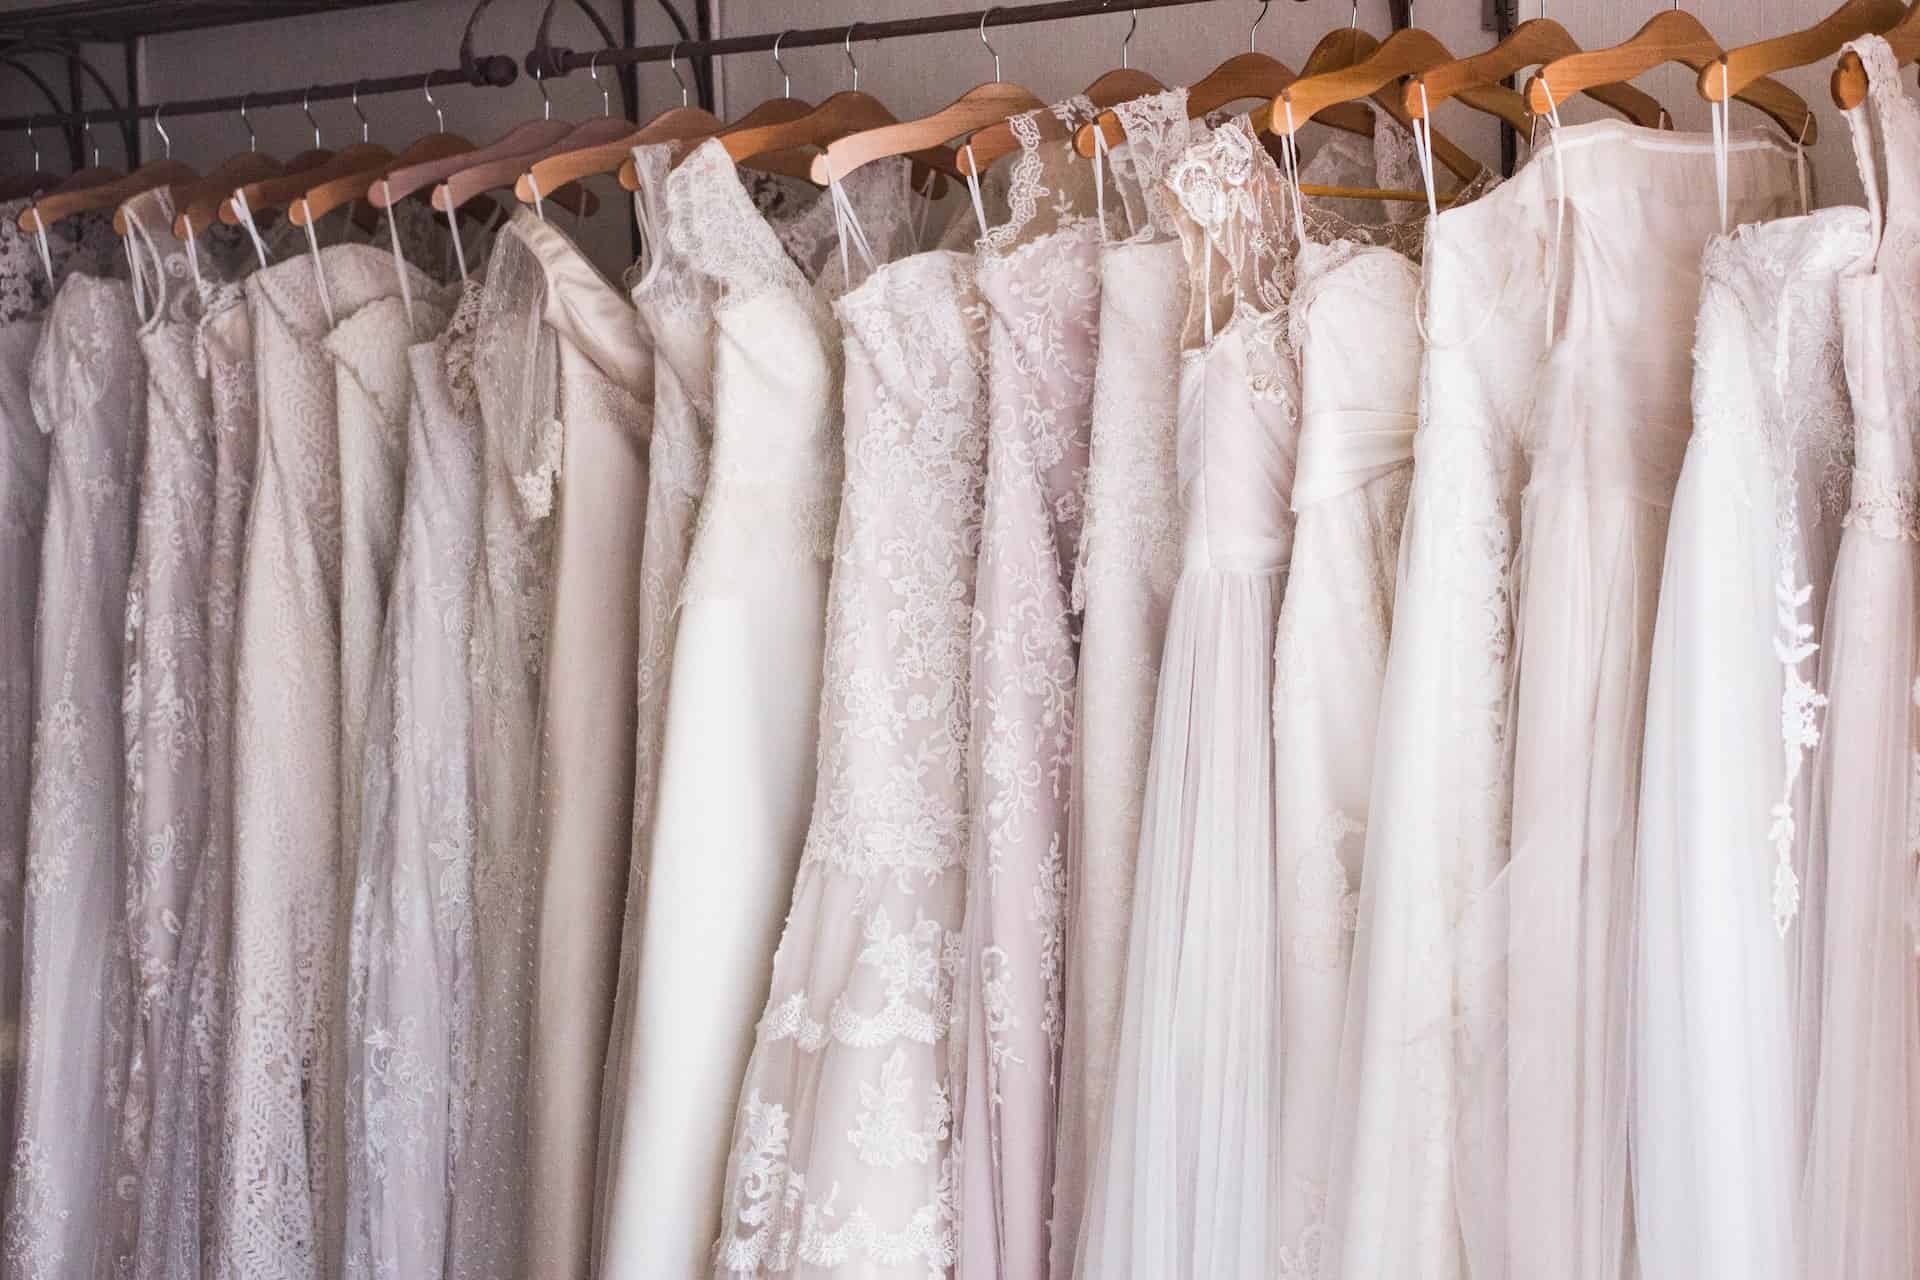 Everything you need to know about renting a dress!